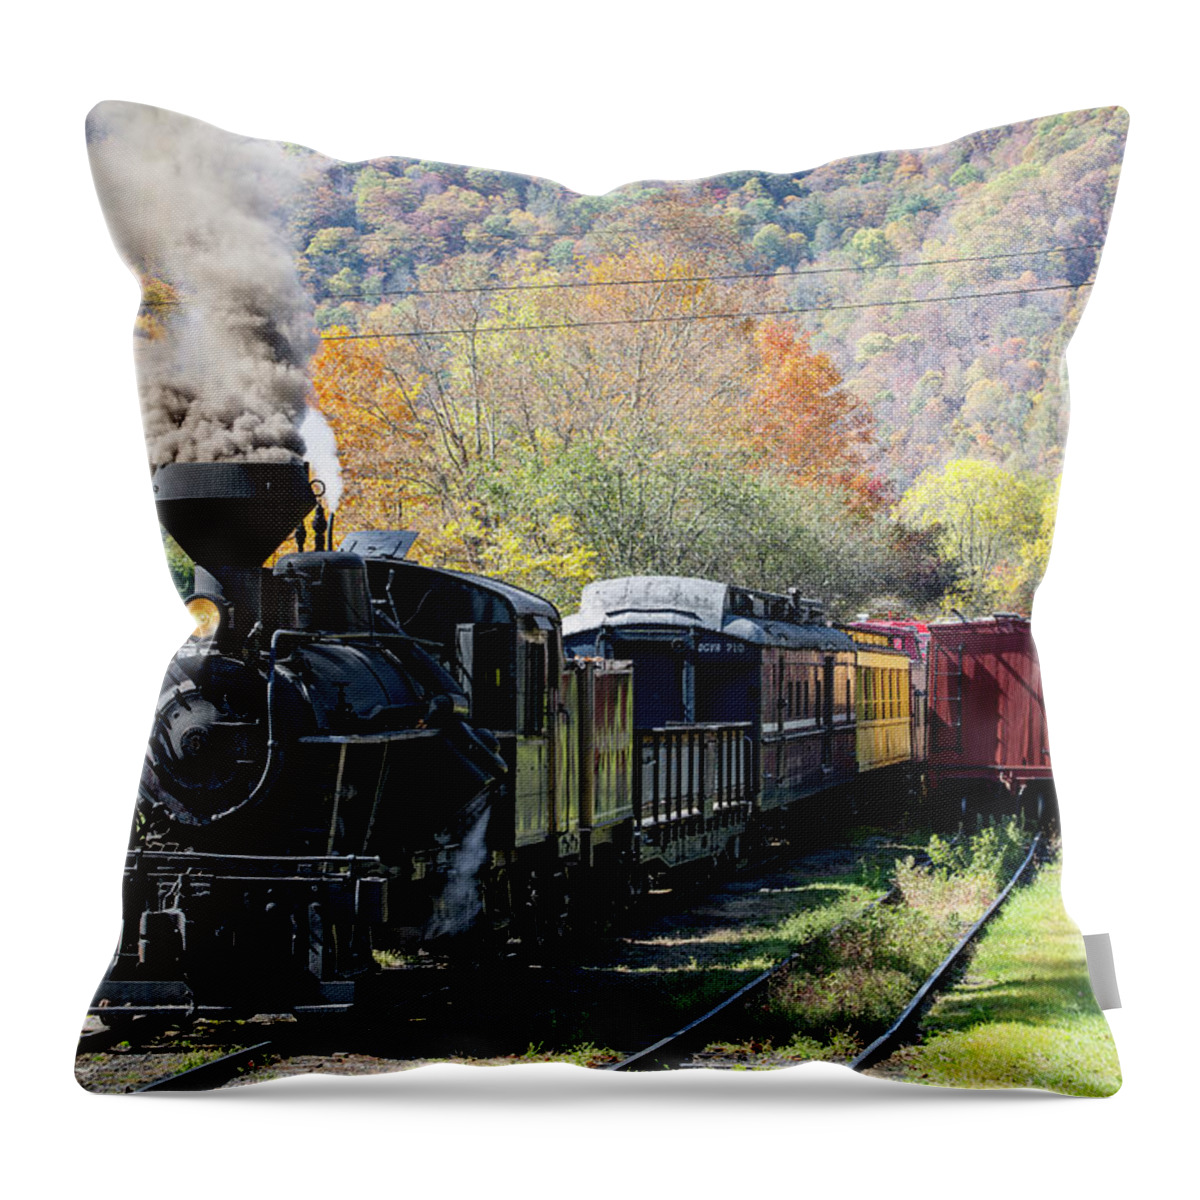 Photosbymch Throw Pillow featuring the photograph Durbin Rocket with Fall Leaves by M C Hood